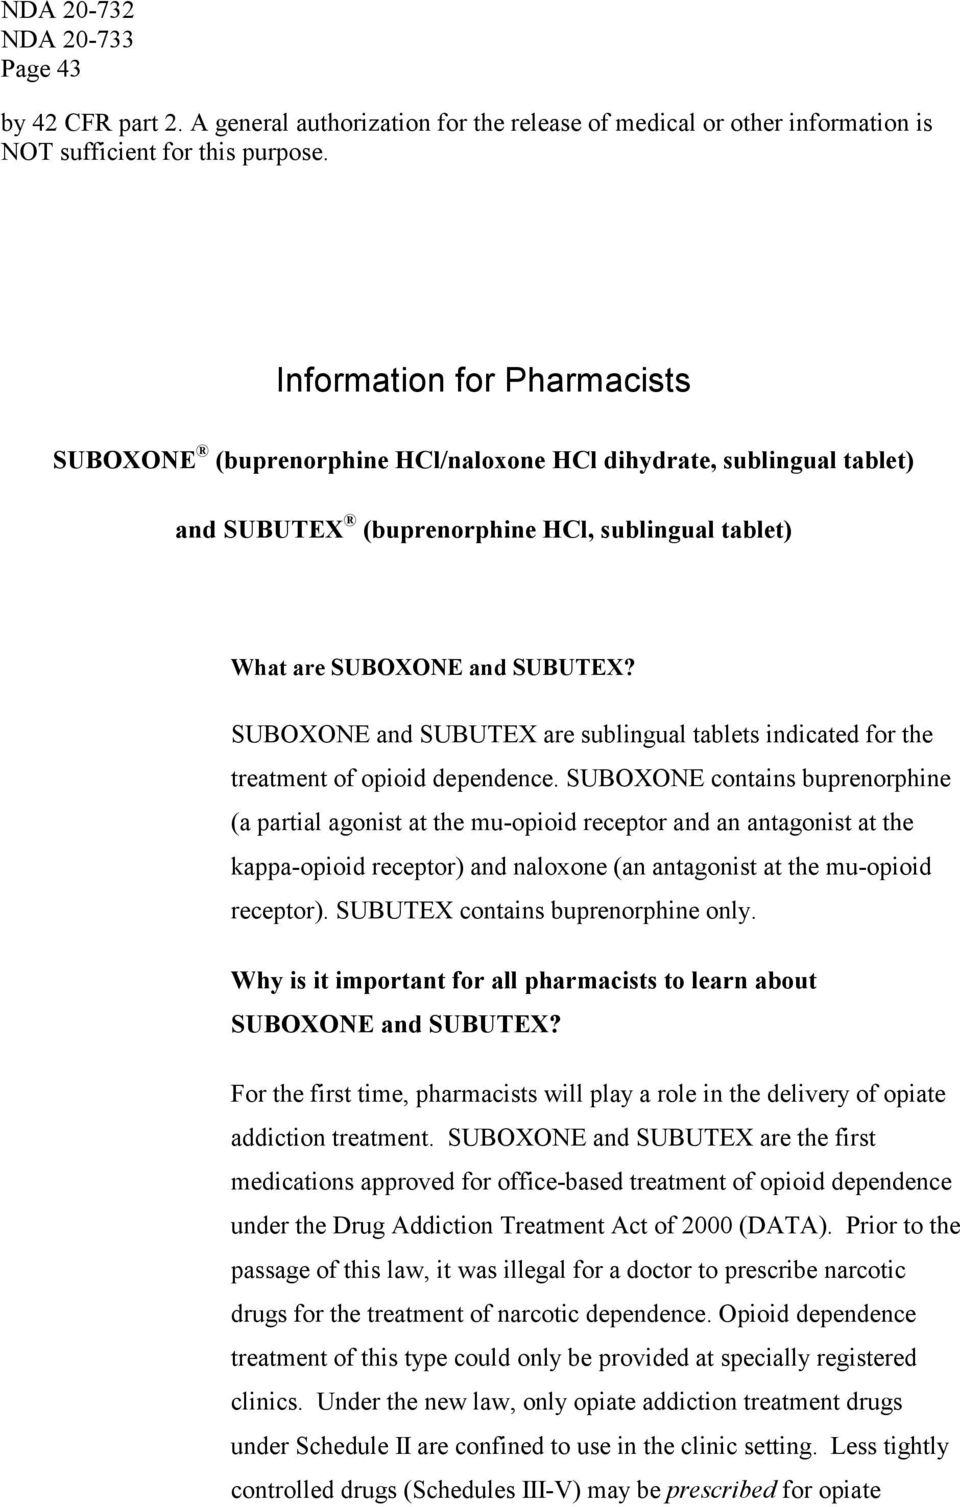 SUBOXONE and SUBUTEX are sublingual tablets indicated for the treatment of opioid dependence.